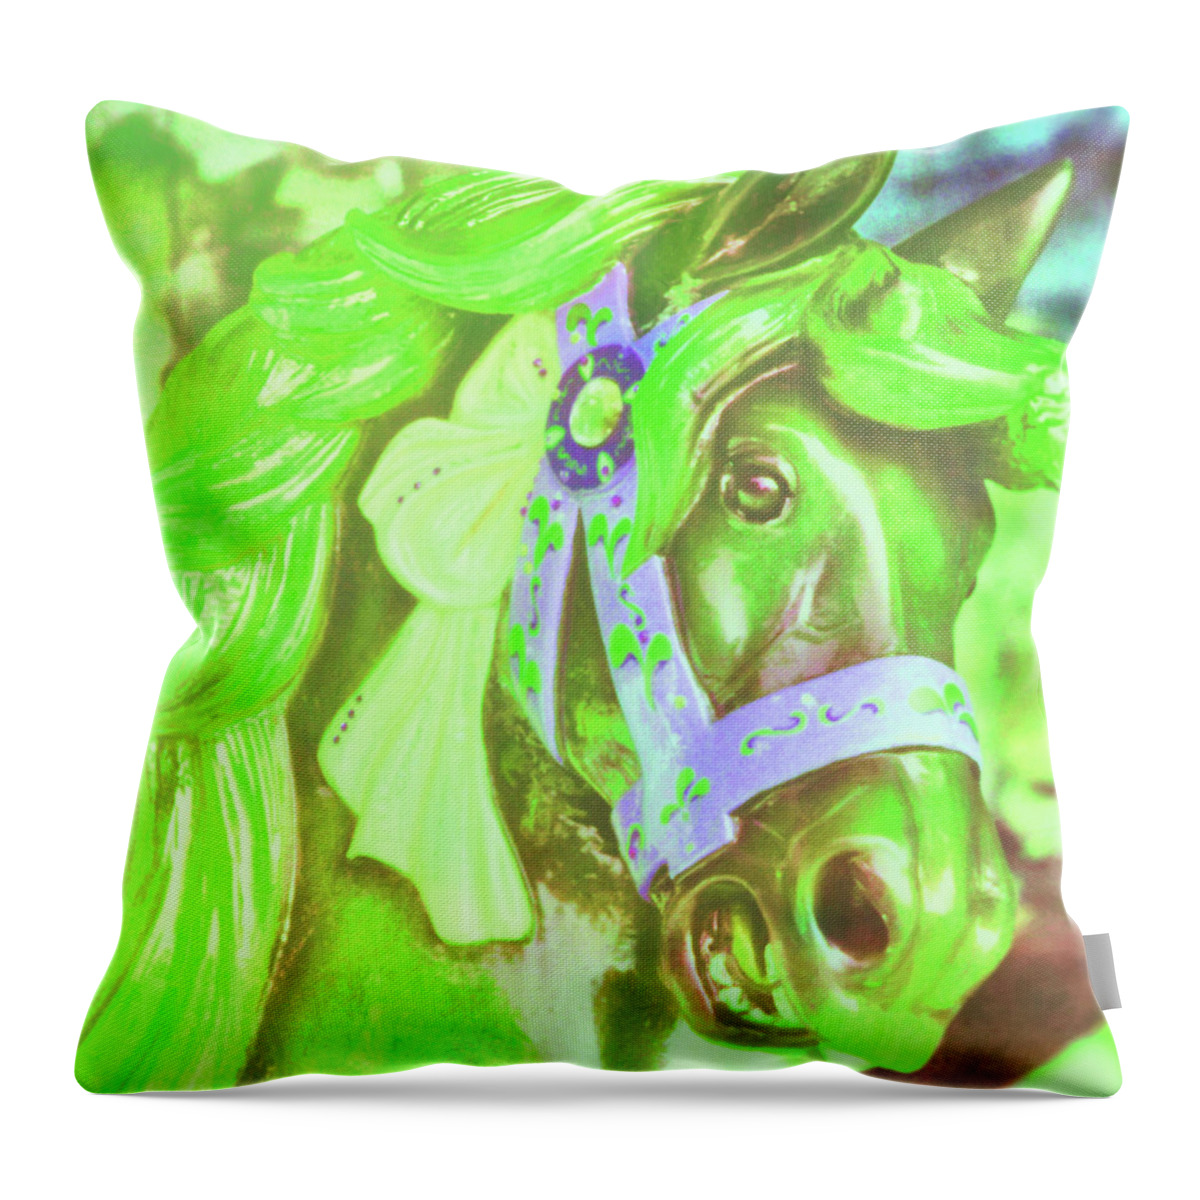 Allan Throw Pillow featuring the photograph Ride Of Old Greens by JAMART Photography